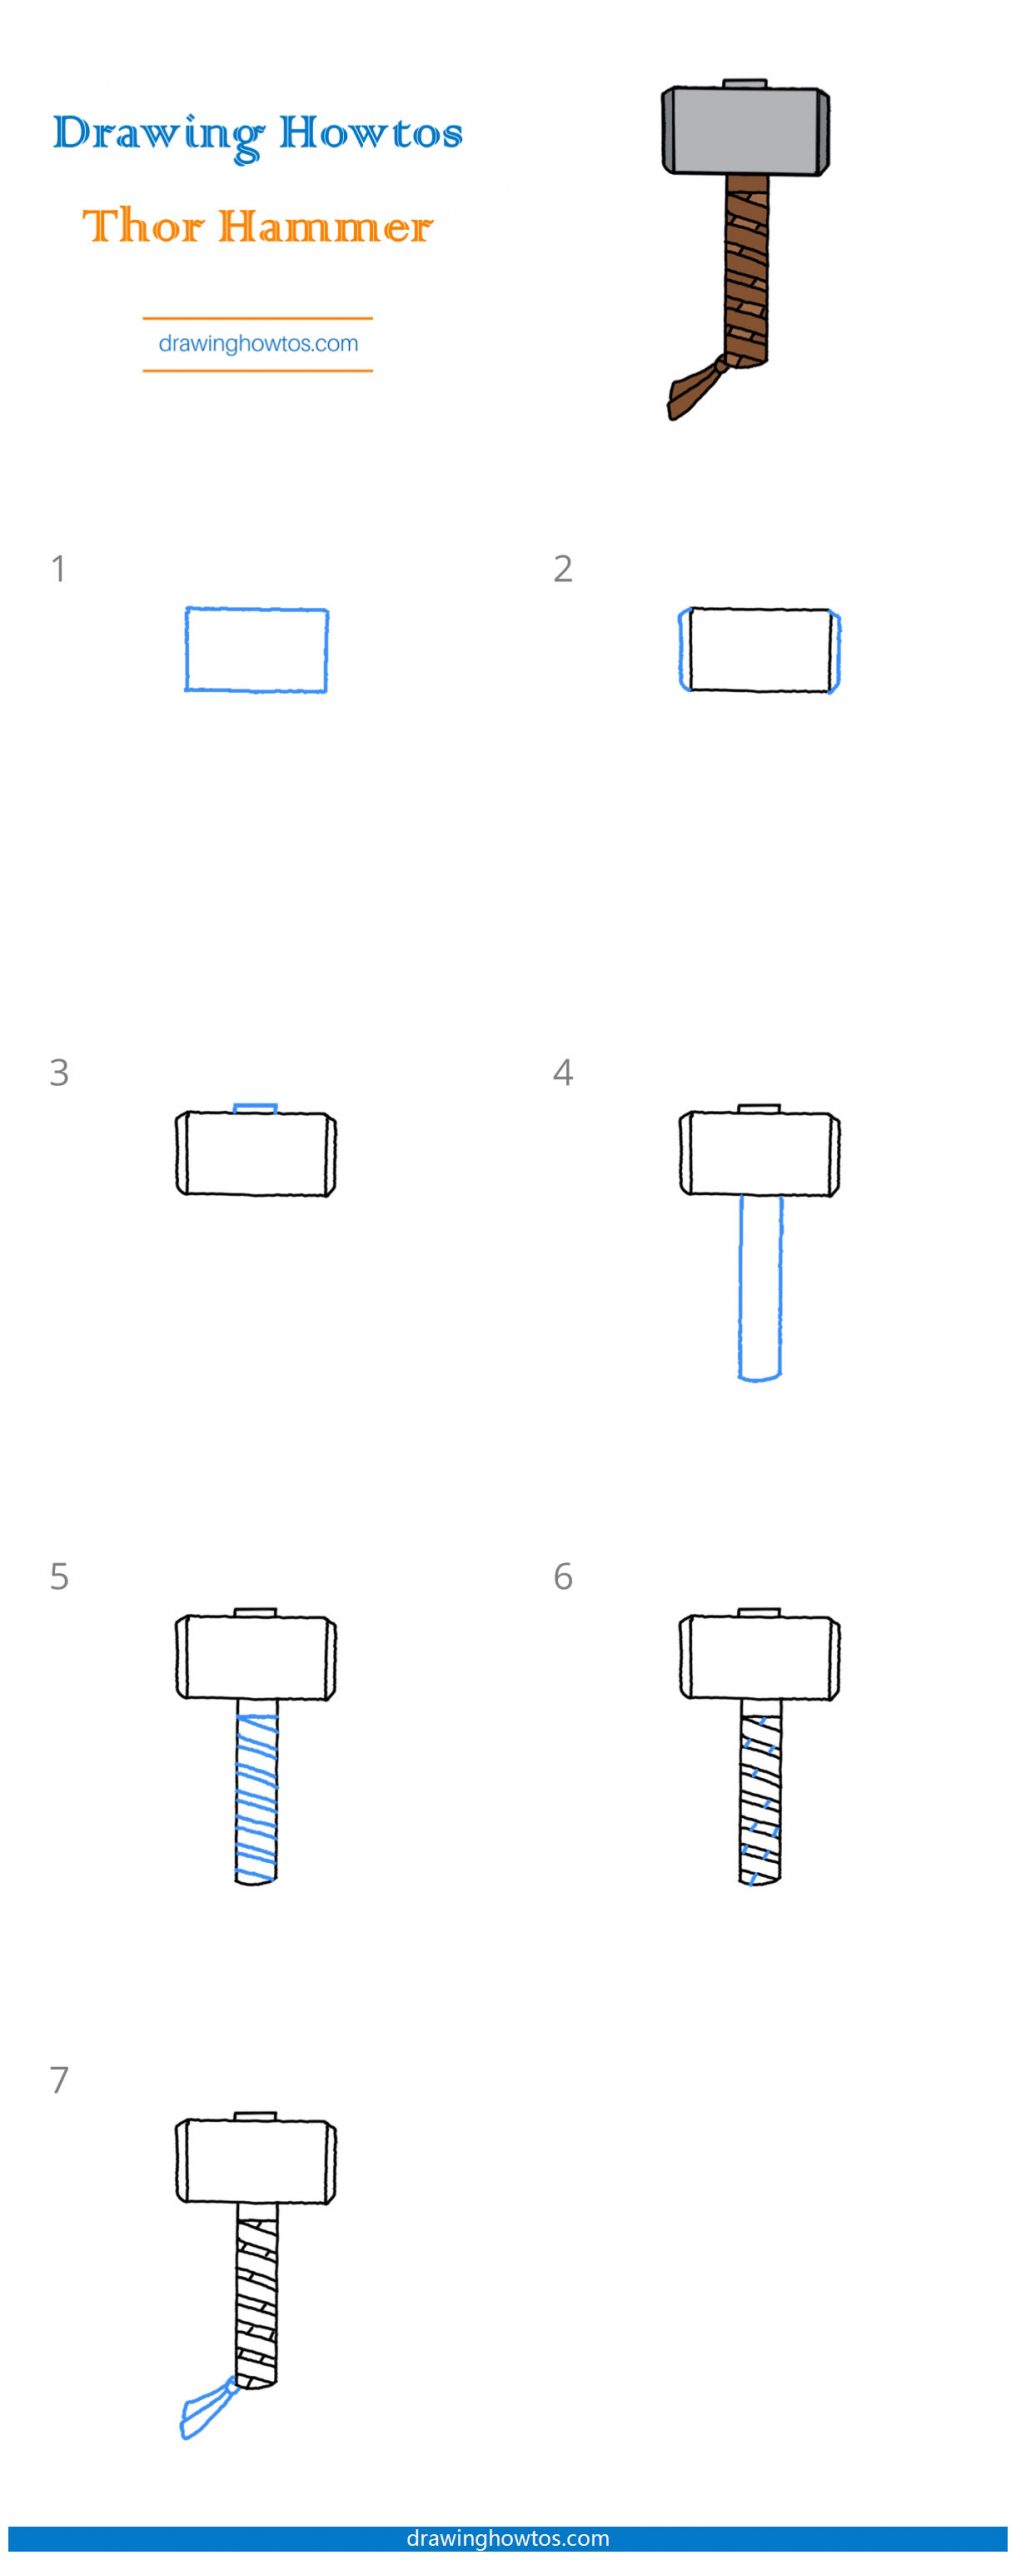 How to Draw Thor's Hammer Step by Step